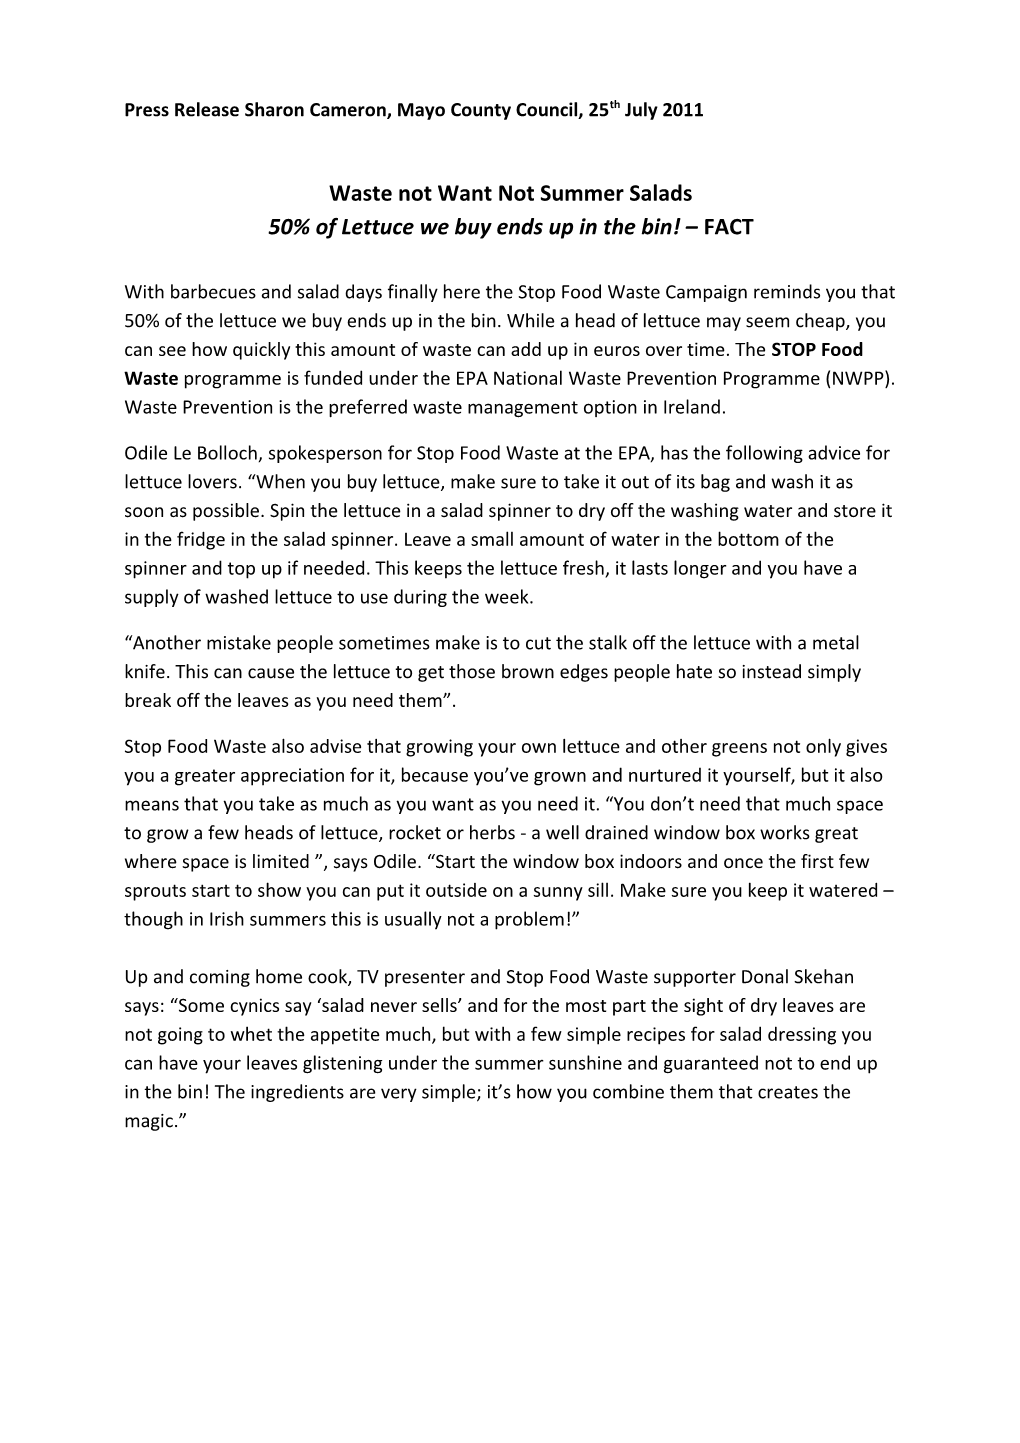 Press Release Sharon Cameron 25Th July 2011